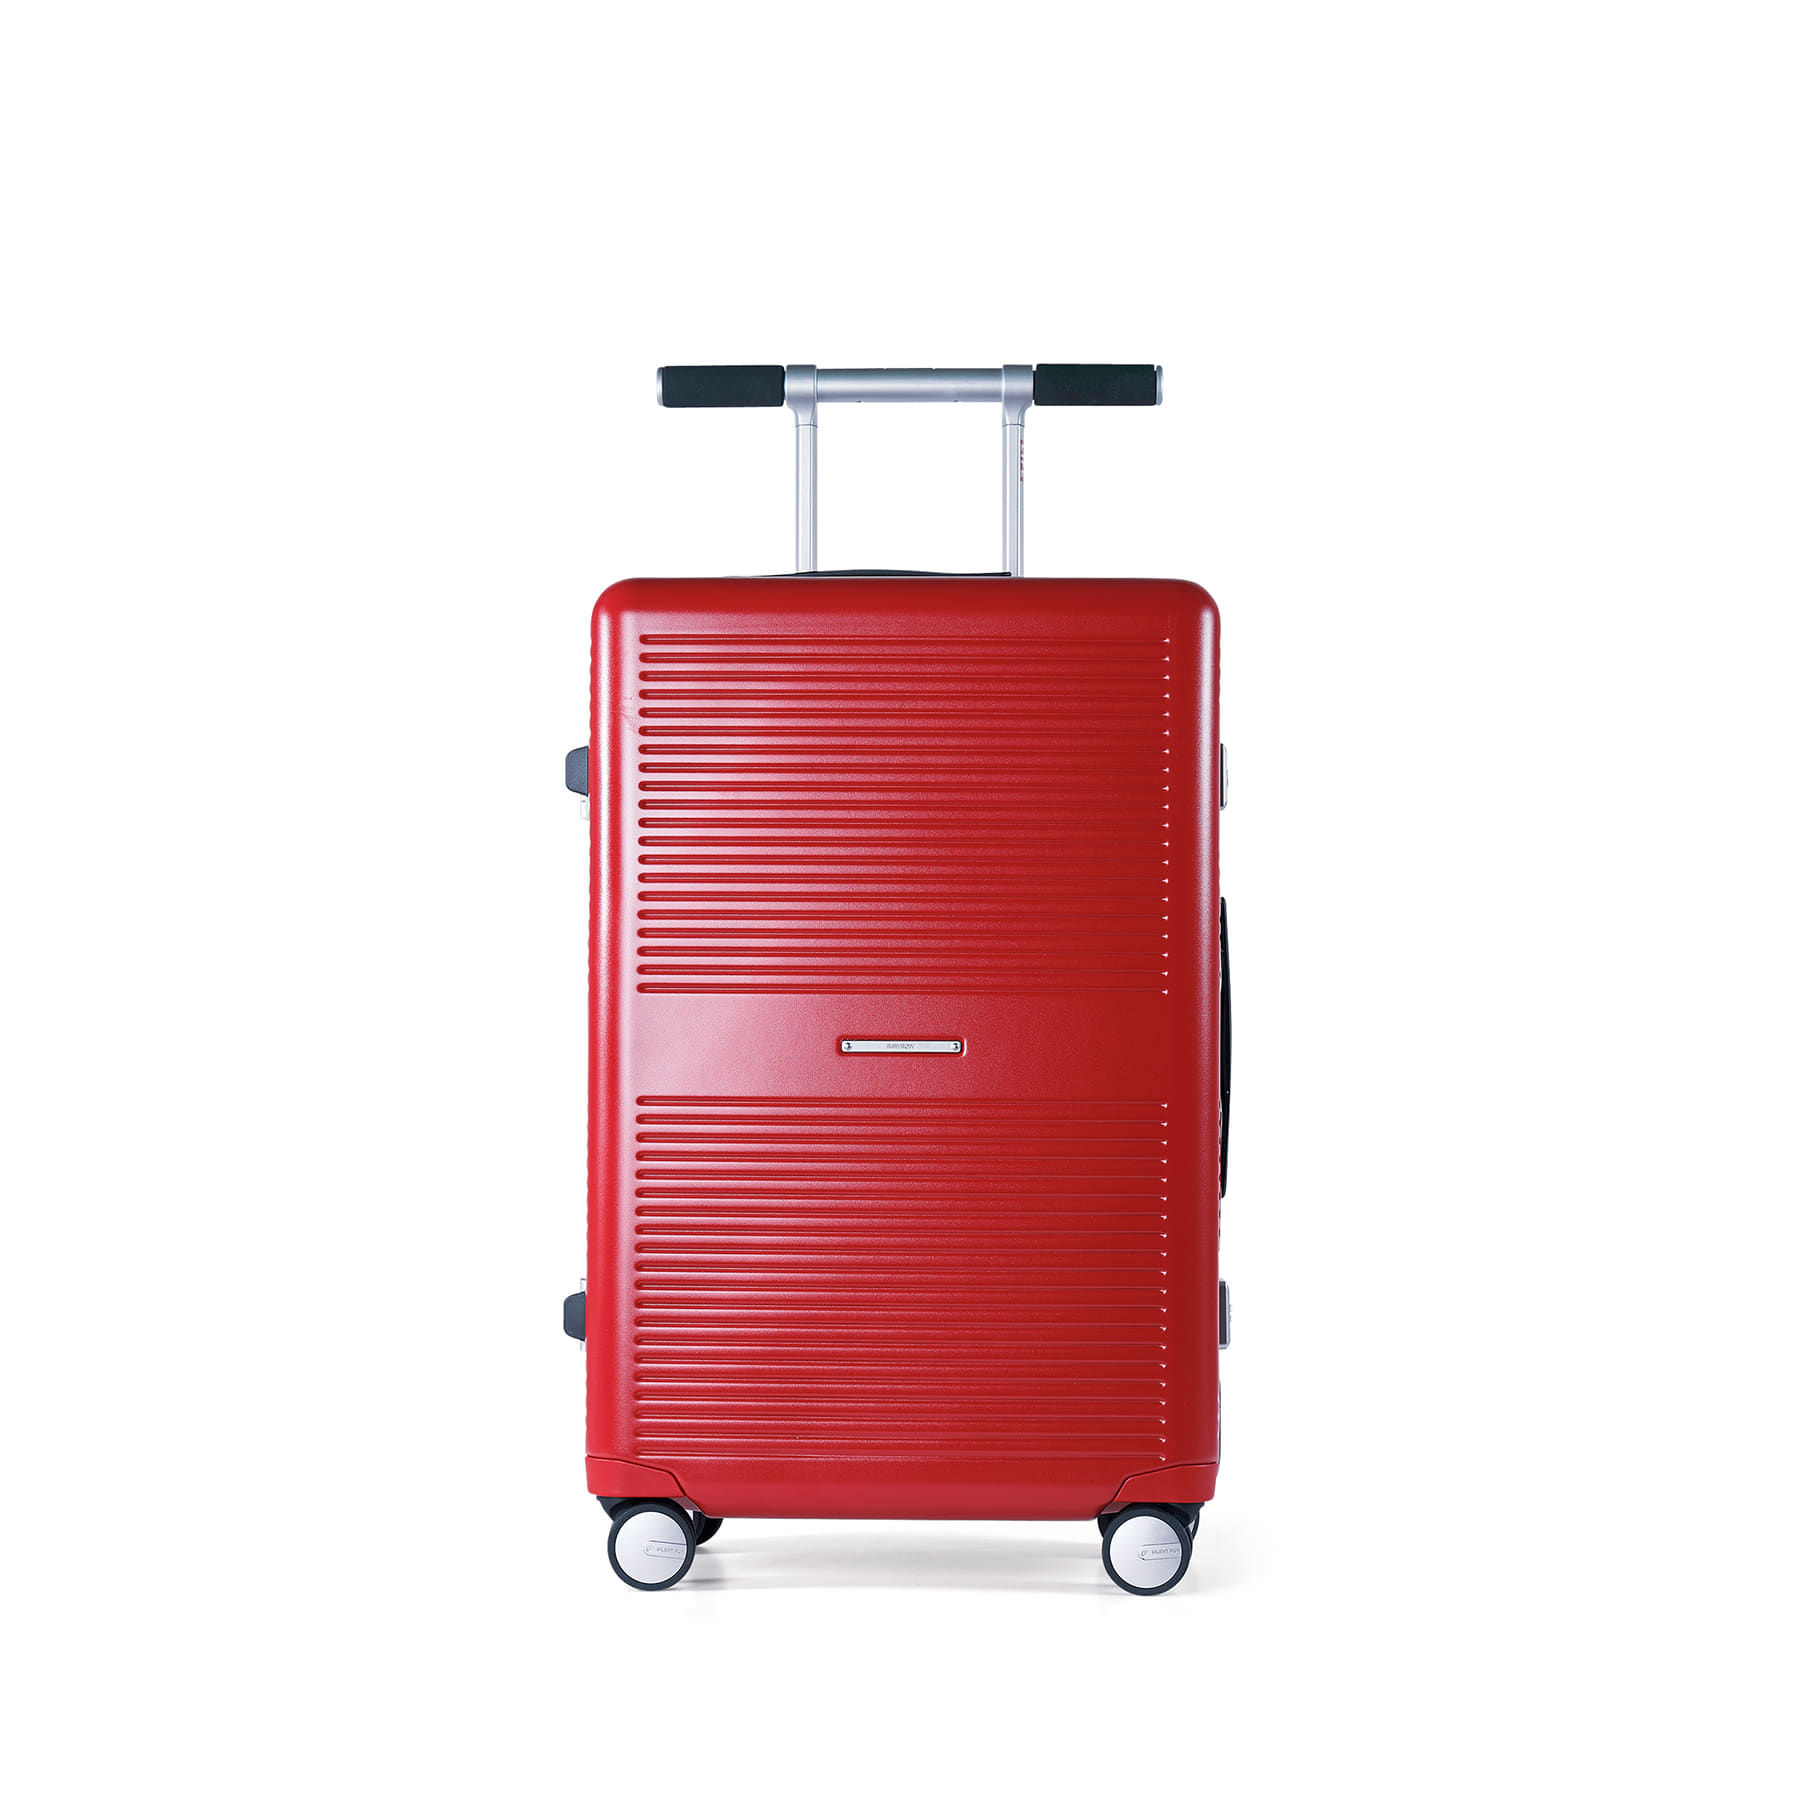 R TRUNK FRAME 63L LIFE RED